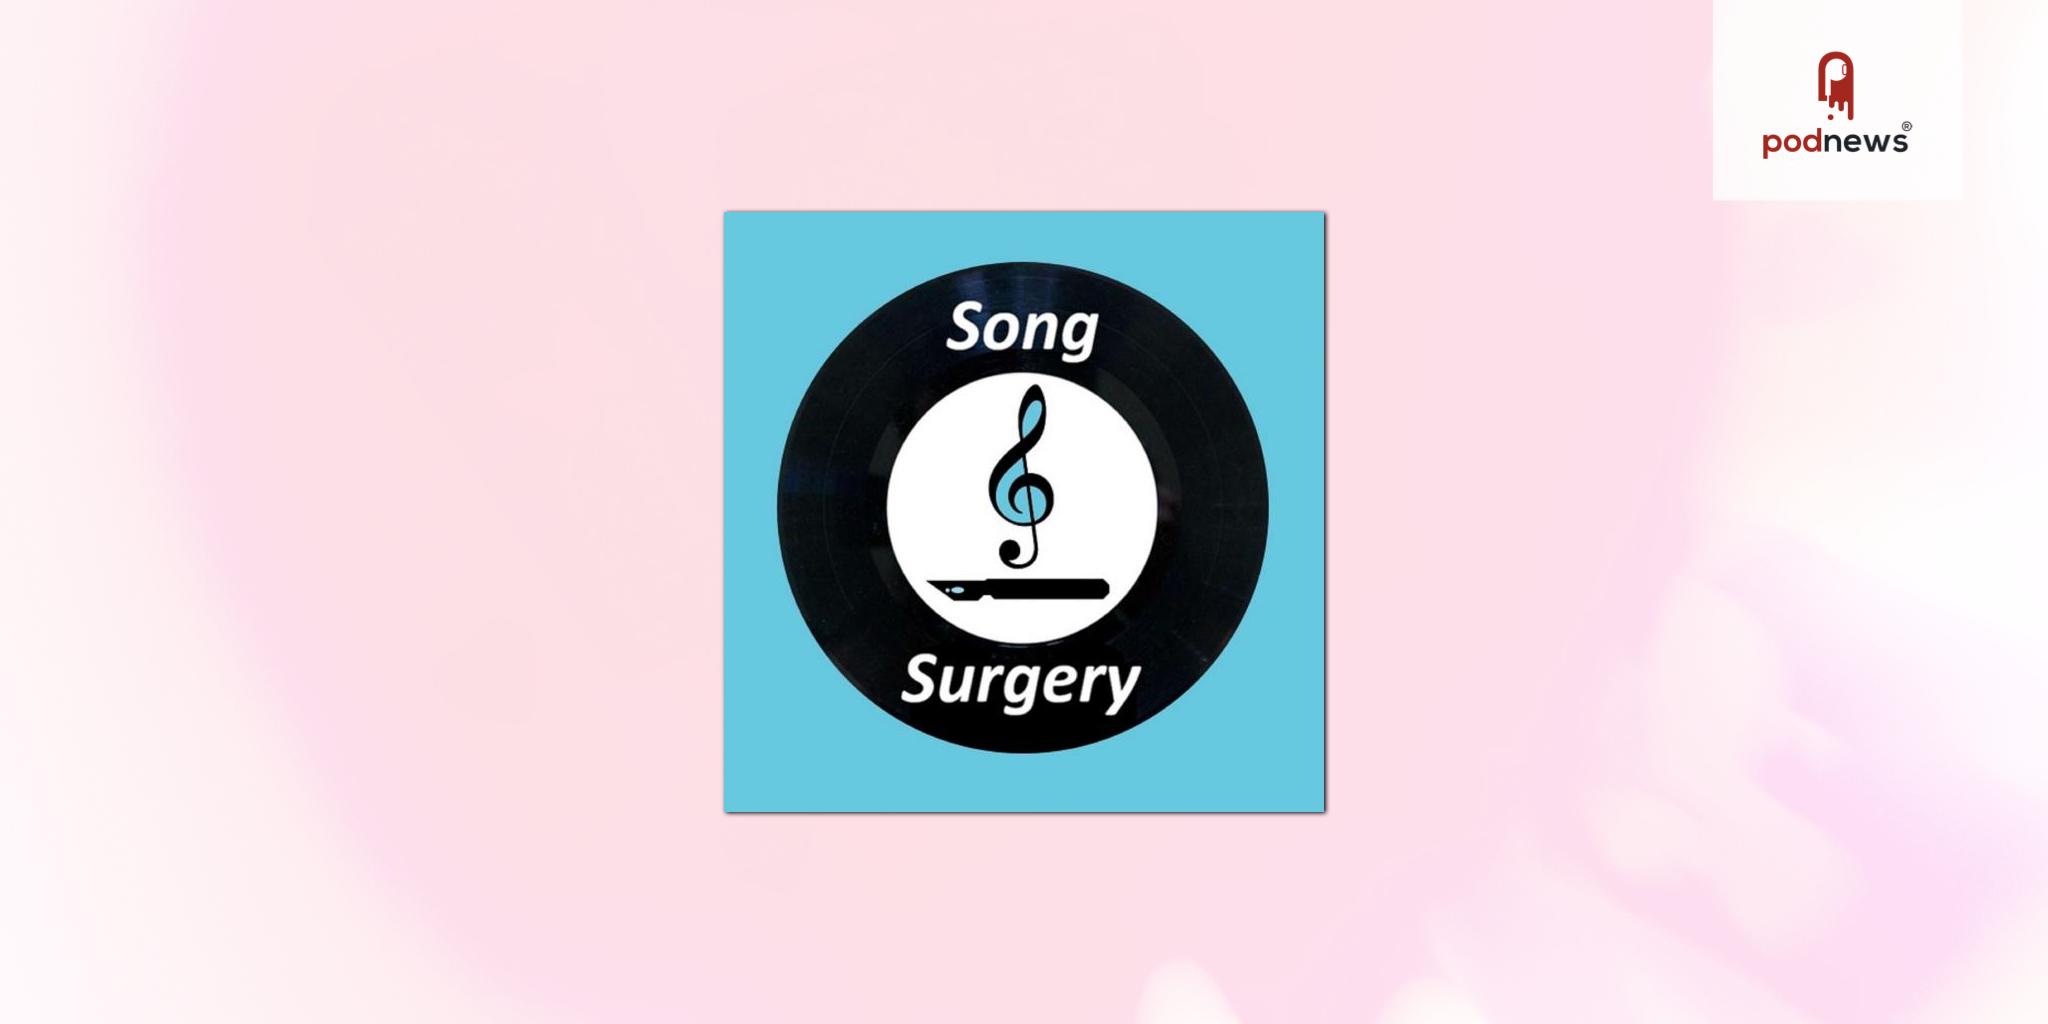 Song Surgery traces the origins of songs for Baby Boomers and Gen X